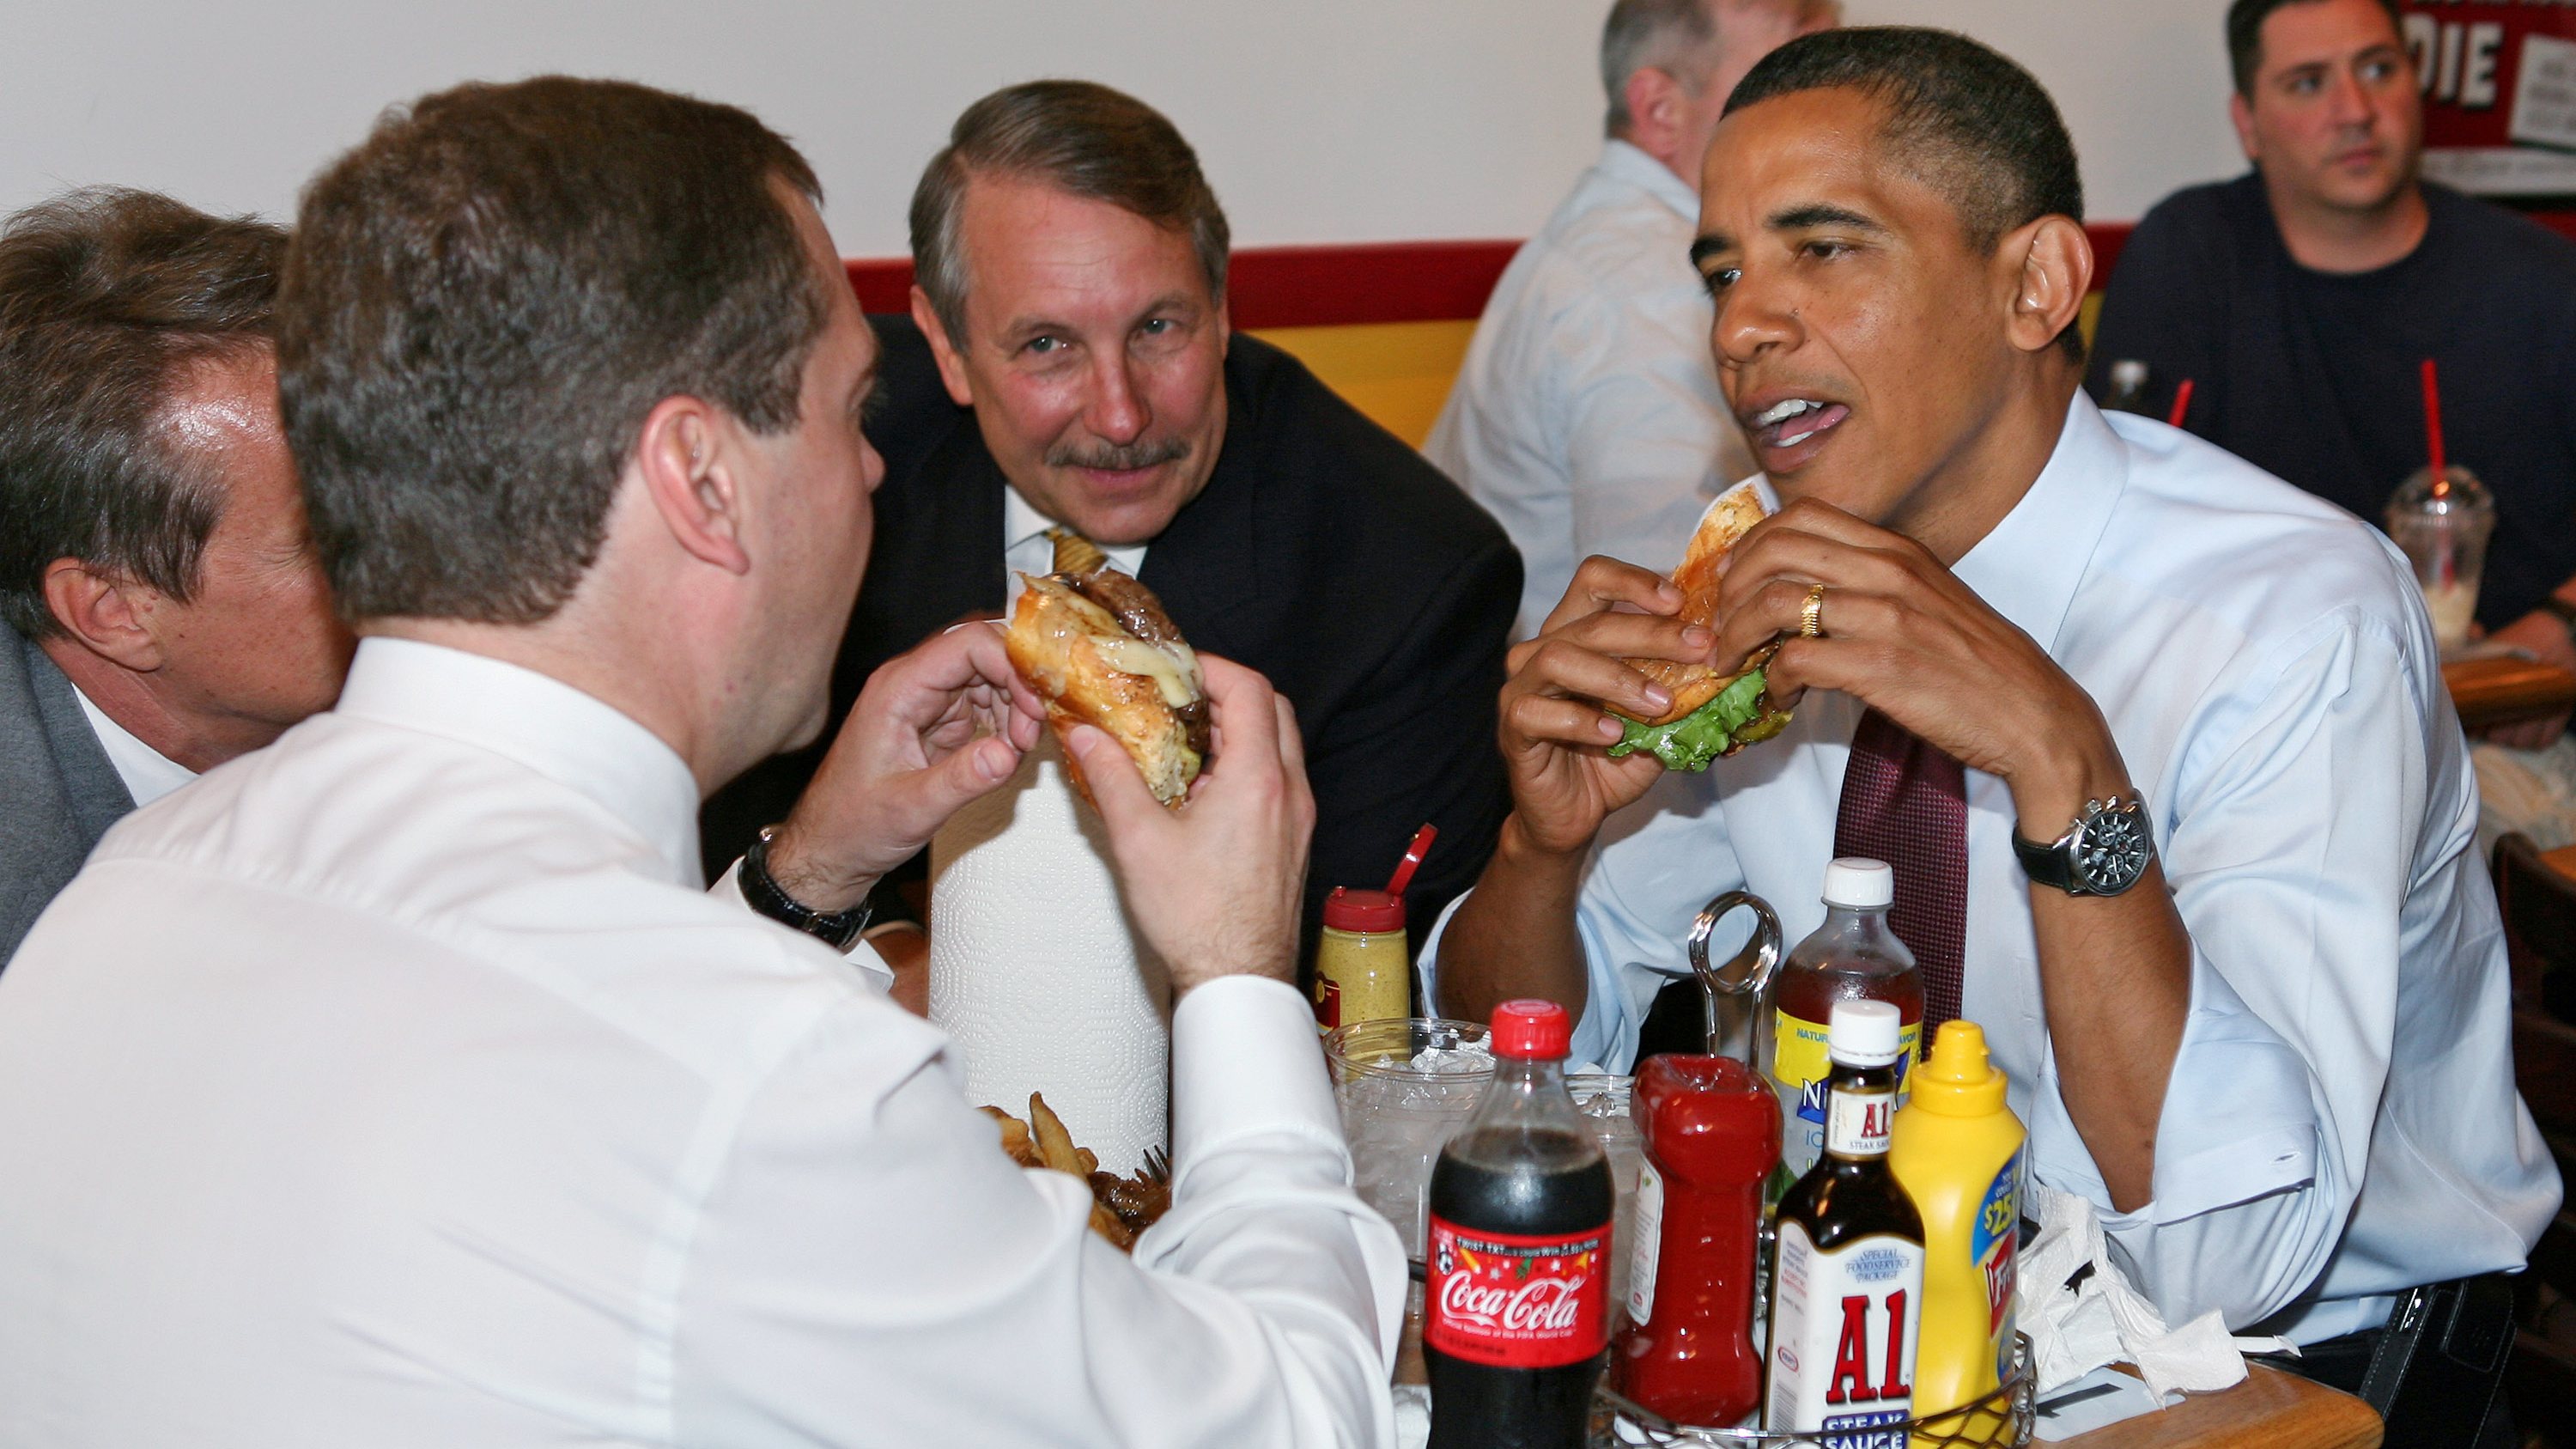 Obama And Medvedev Have Cheeseburger Lunch